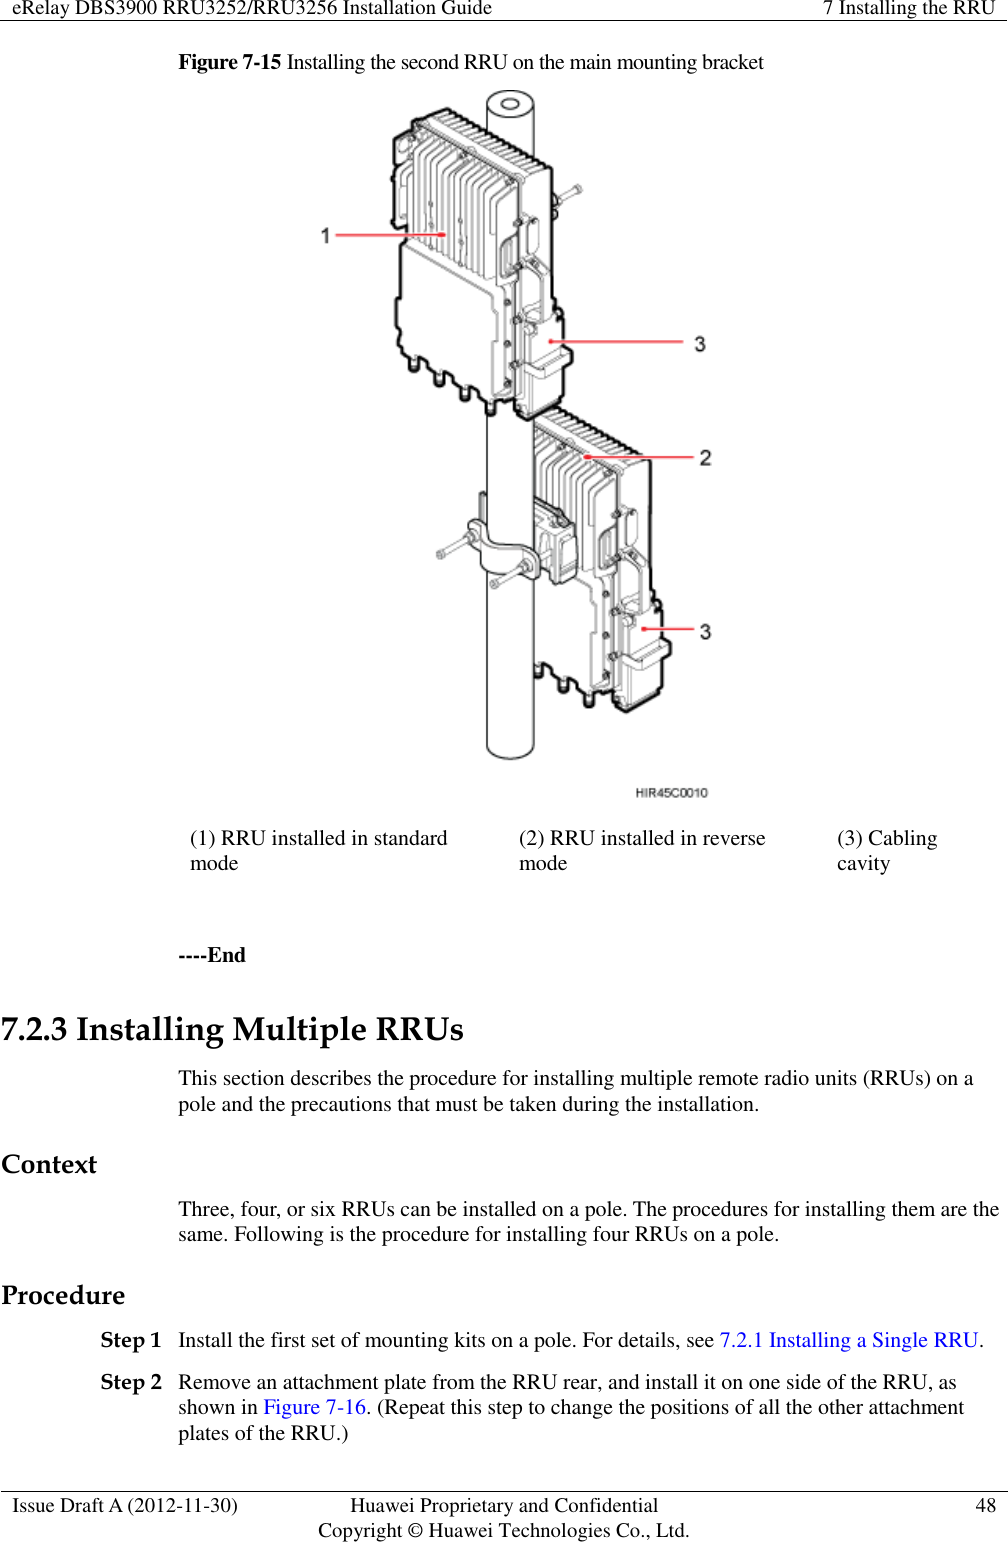 eRelay DBS3900 RRU3252/RRU3256 Installation Guide 7 Installing the RRU  Issue Draft A (2012-11-30) Huawei Proprietary and Confidential                                     Copyright © Huawei Technologies Co., Ltd. 48  Figure 7-15 Installing the second RRU on the main mounting bracket  (1) RRU installed in standard mode (2) RRU installed in reverse mode (3) Cabling cavity  ----End 7.2.3 Installing Multiple RRUs This section describes the procedure for installing multiple remote radio units (RRUs) on a pole and the precautions that must be taken during the installation. Context Three, four, or six RRUs can be installed on a pole. The procedures for installing them are the same. Following is the procedure for installing four RRUs on a pole. Procedure Step 1 Install the first set of mounting kits on a pole. For details, see 7.2.1 Installing a Single RRU. Step 2 Remove an attachment plate from the RRU rear, and install it on one side of the RRU, as shown in Figure 7-16. (Repeat this step to change the positions of all the other attachment plates of the RRU.) 